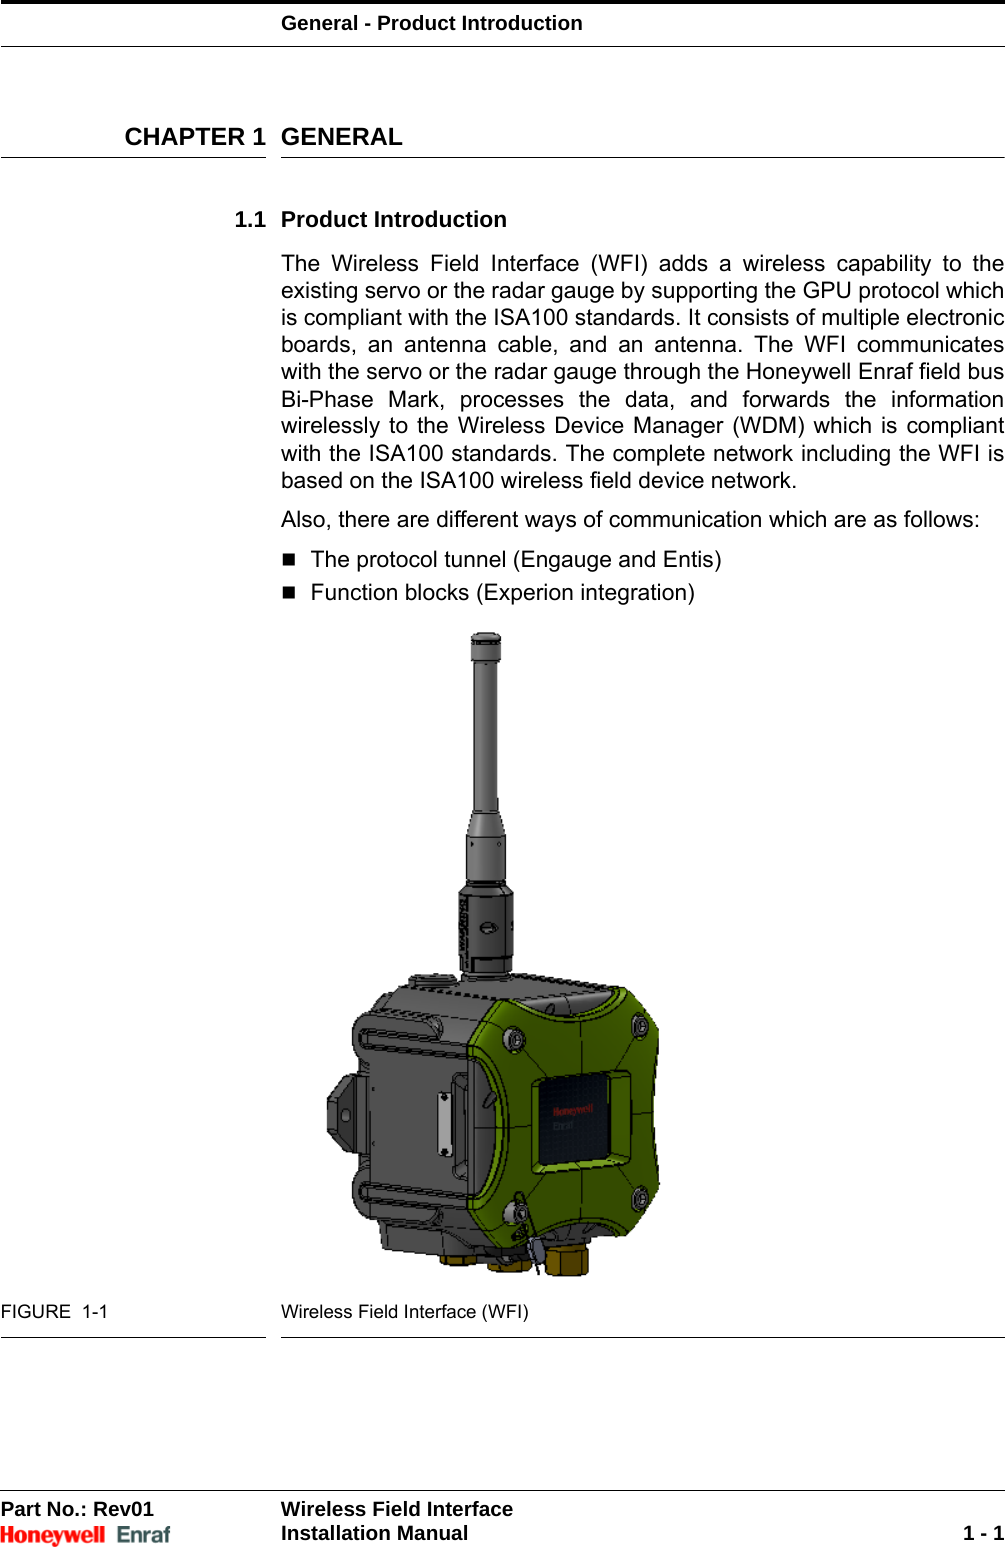 General - Product IntroductionPart No.: Rev01  Wireless Field InterfaceInstallation Manual 1 - 1CHAPTER 1 GENERAL1.1 Product IntroductionThe Wireless Field Interface (WFI) adds a wireless capability to the existing servo or the radar gauge by supporting the GPU protocol which is compliant with the ISA100 standards. It consists of multiple electronic boards, an antenna cable, and an antenna. The WFI communicates with the servo or the radar gauge through the Honeywell Enraf field bus Bi-Phase Mark, processes the data, and forwards the information wirelessly to the Wireless Device Manager (WDM) which is compliant with the ISA100 standards. The complete network including the WFI is based on the ISA100 wireless field device network.Also, there are different ways of communication which are as follows:The protocol tunnel (Engauge and Entis) Function blocks (Experion integration)FIGURE  1-1 Wireless Field Interface (WFI)